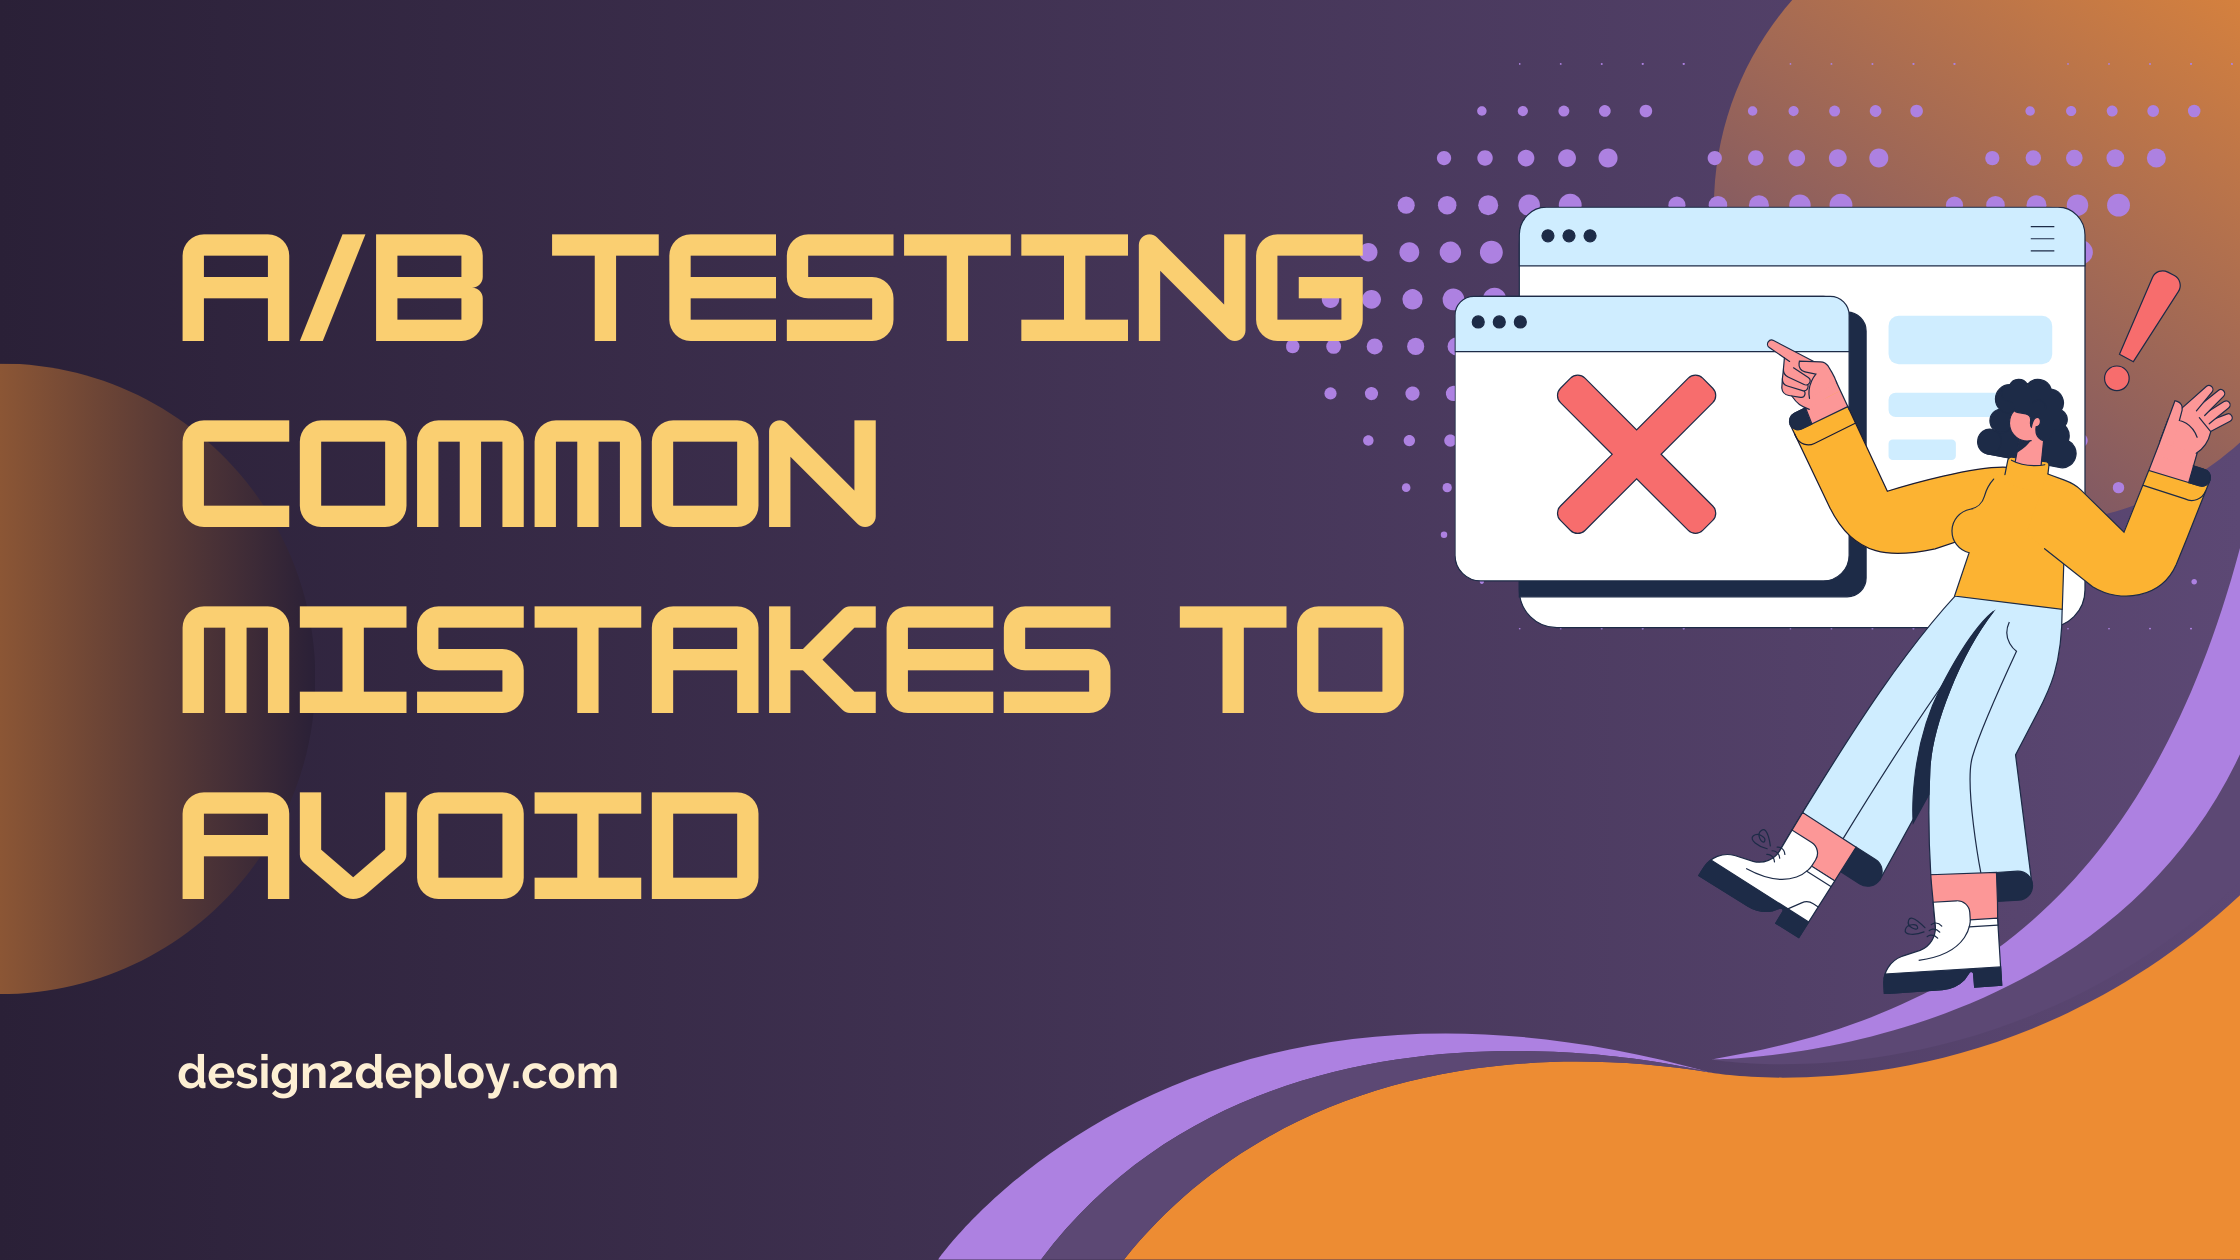 A/B Testing Common Mistakes to Avoid